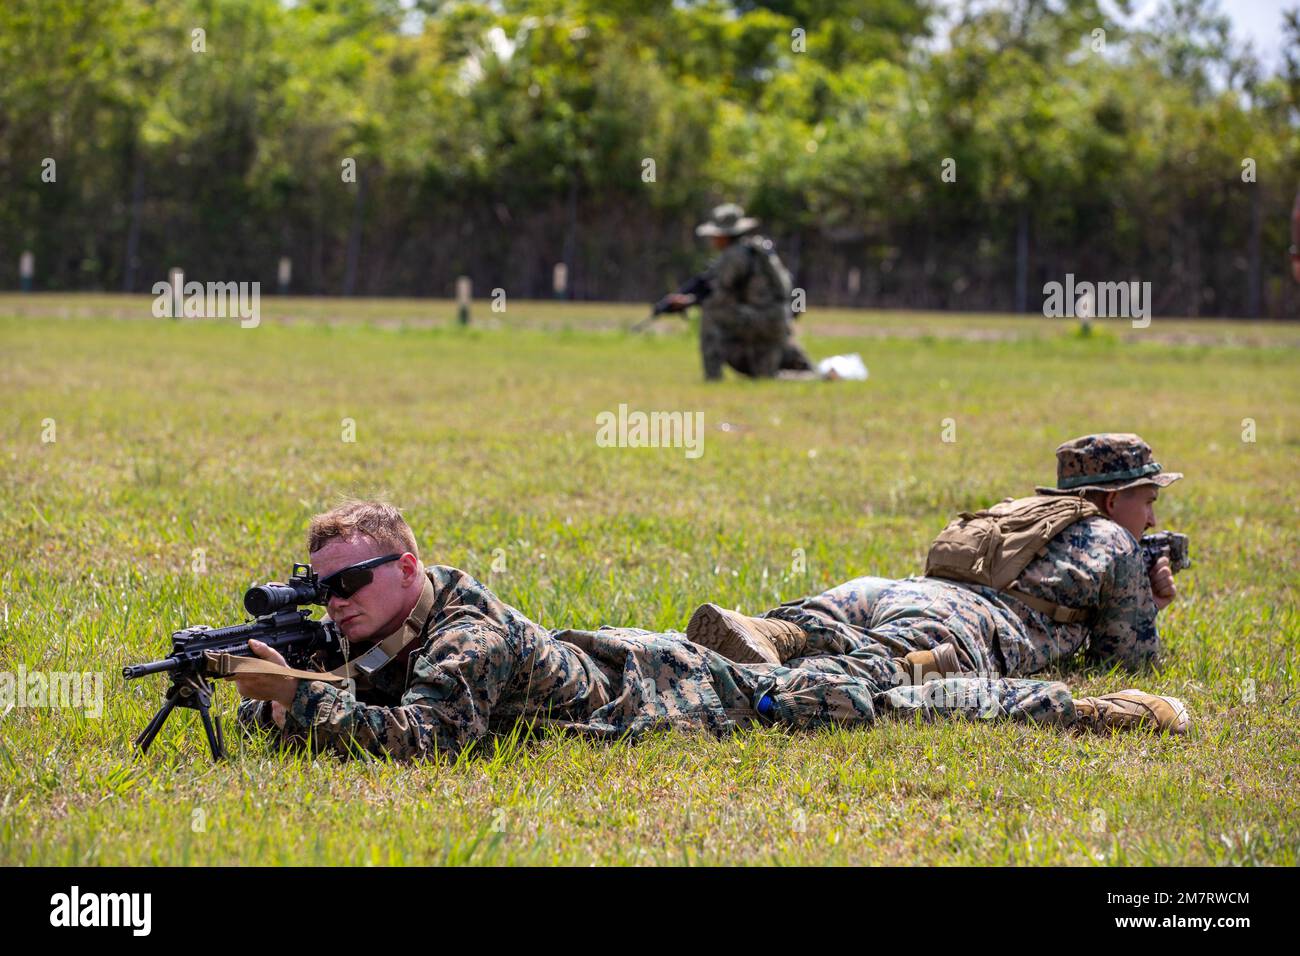 U.S. Marines assigned to 3rd Battalion, 25th Marines practice squad movement tactics with Soldiers from St. Lucia and Mexico at the National Police Traning Academy in Belmopan, Belize as part of the TRADEWINDS22 exercise May 12, 2022. Tradewinds 2022 is a multinational exercise designed to expand the Caribbean region’s capability to mitigate, plan for, and respond to crises; increase regional training capacity and interoperability; develop new and refine existing standard operating procedures; enhance ability to defend exclusive economic zones; and promote human rights and adherence to shared Stock Photo